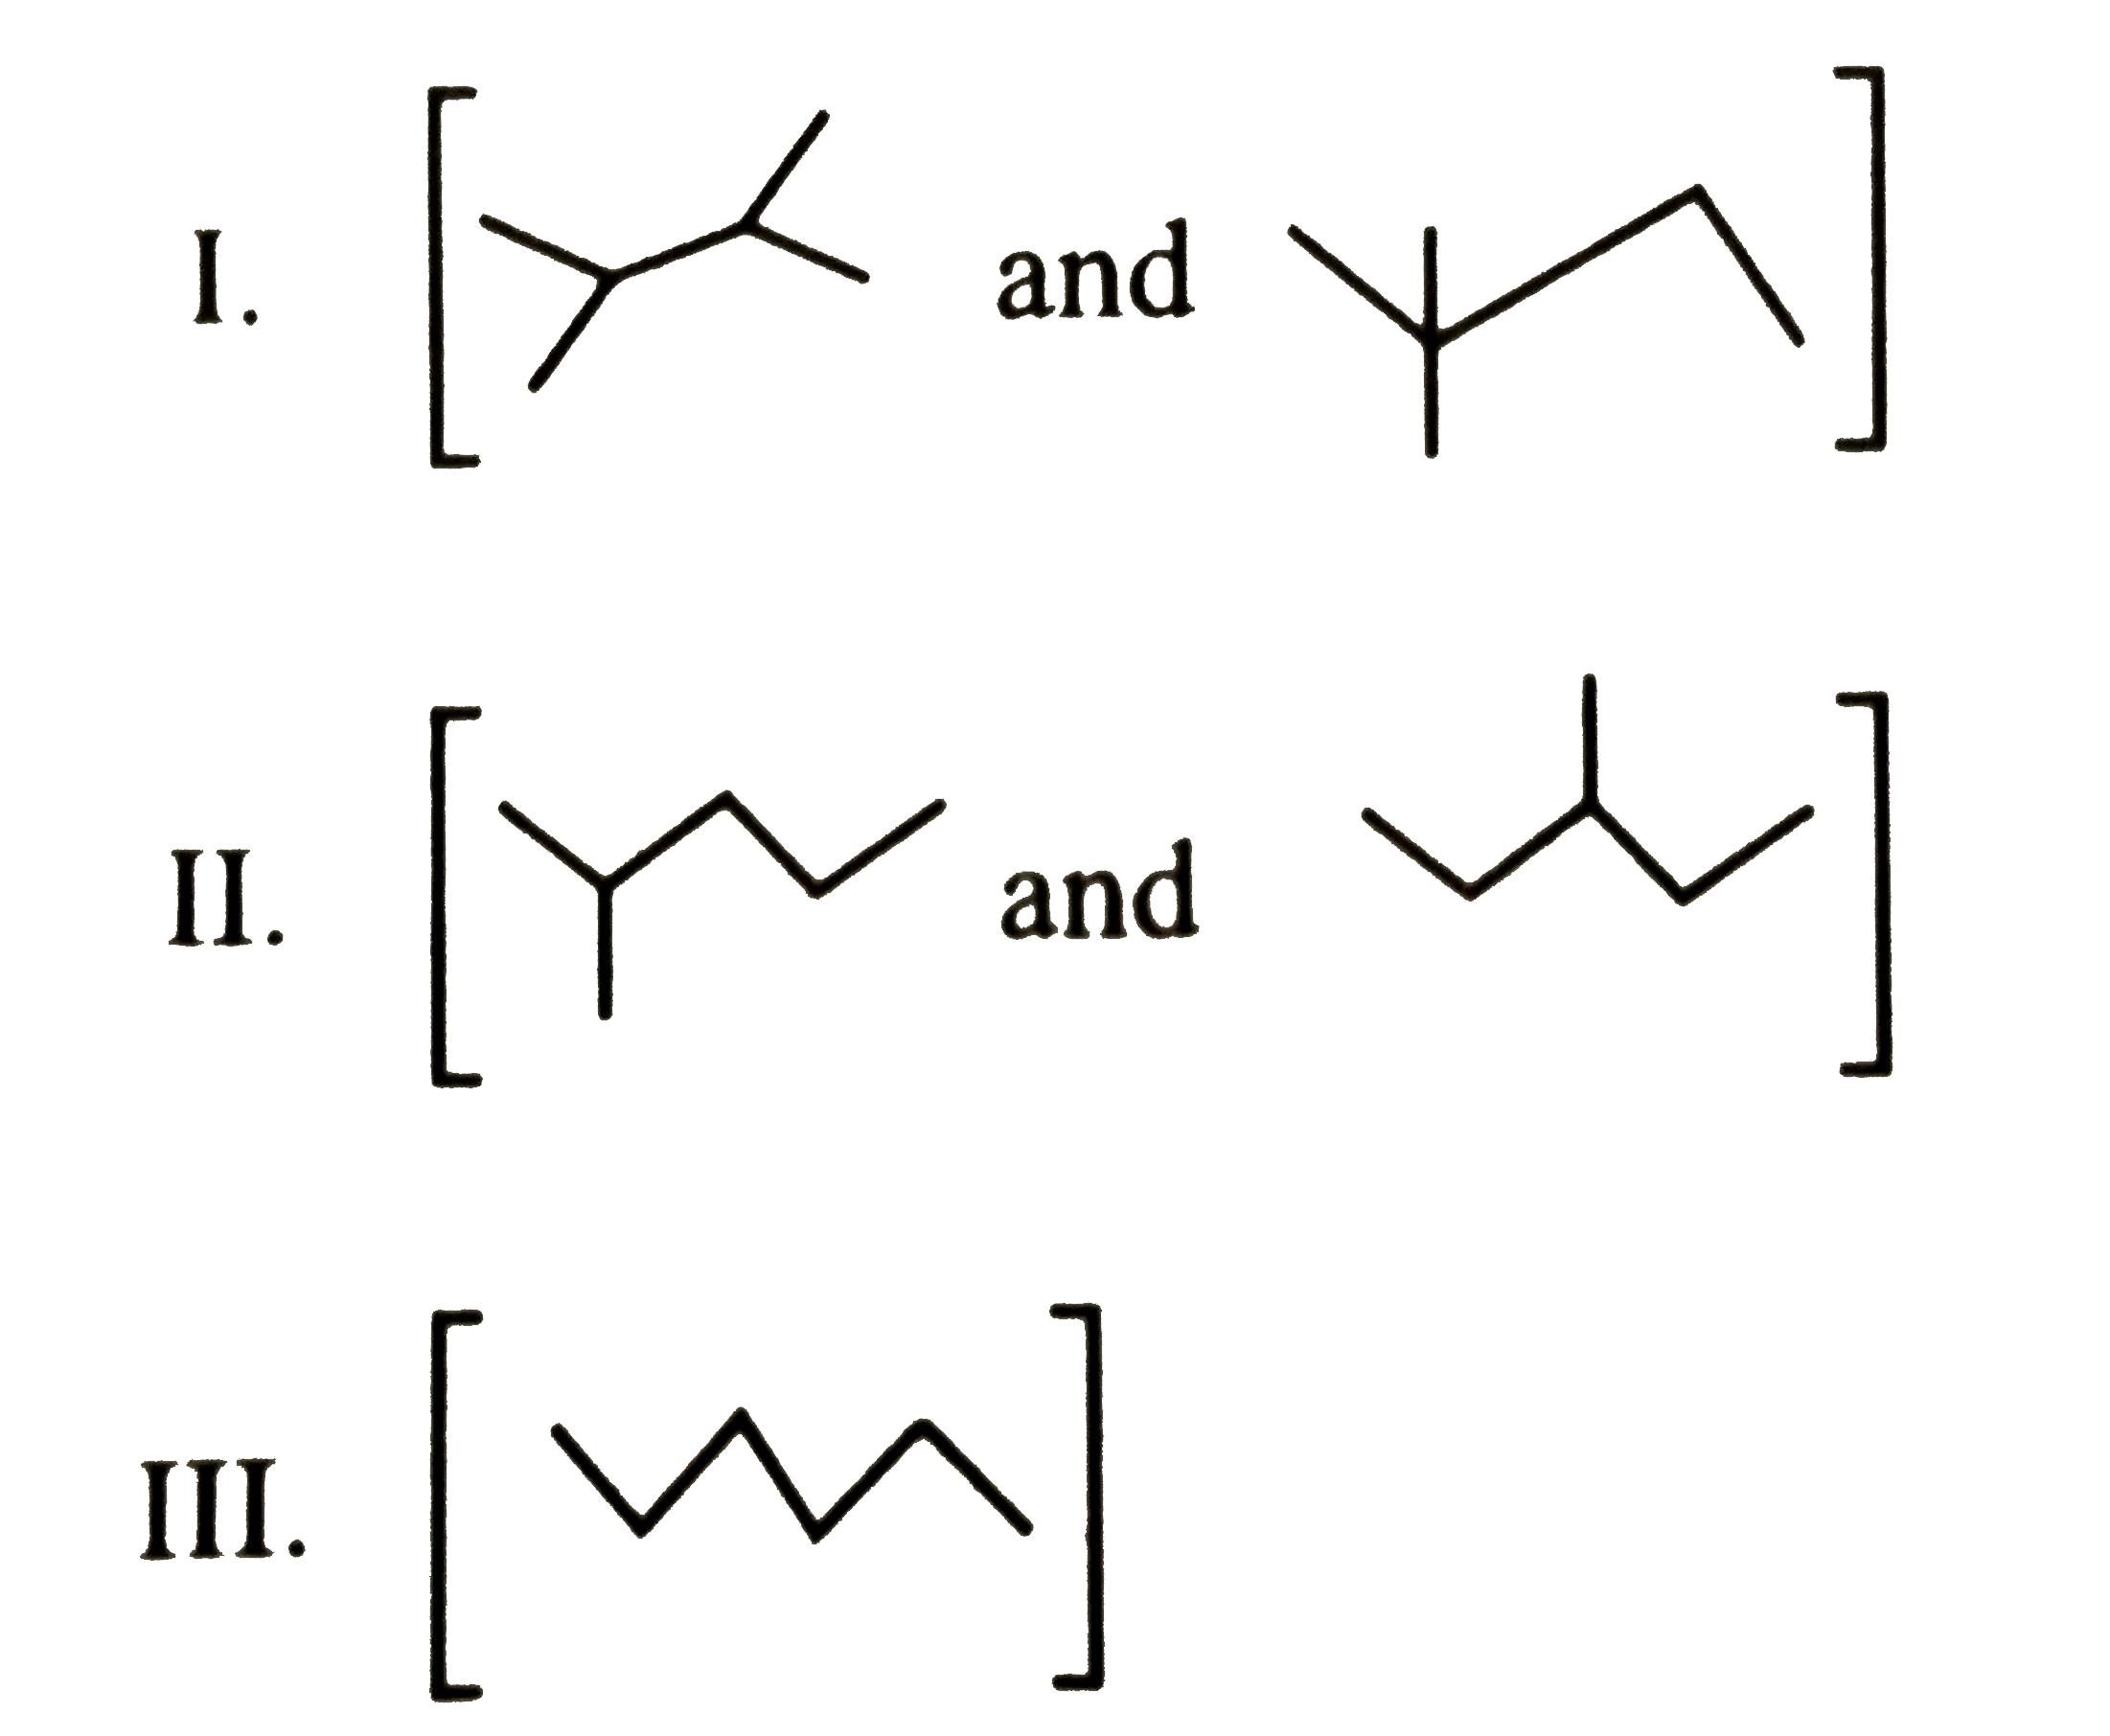 Isomers of hexane, based on their branching , can be divided into three distinct classes as shown in the figure.      The correct order of their boiling point is